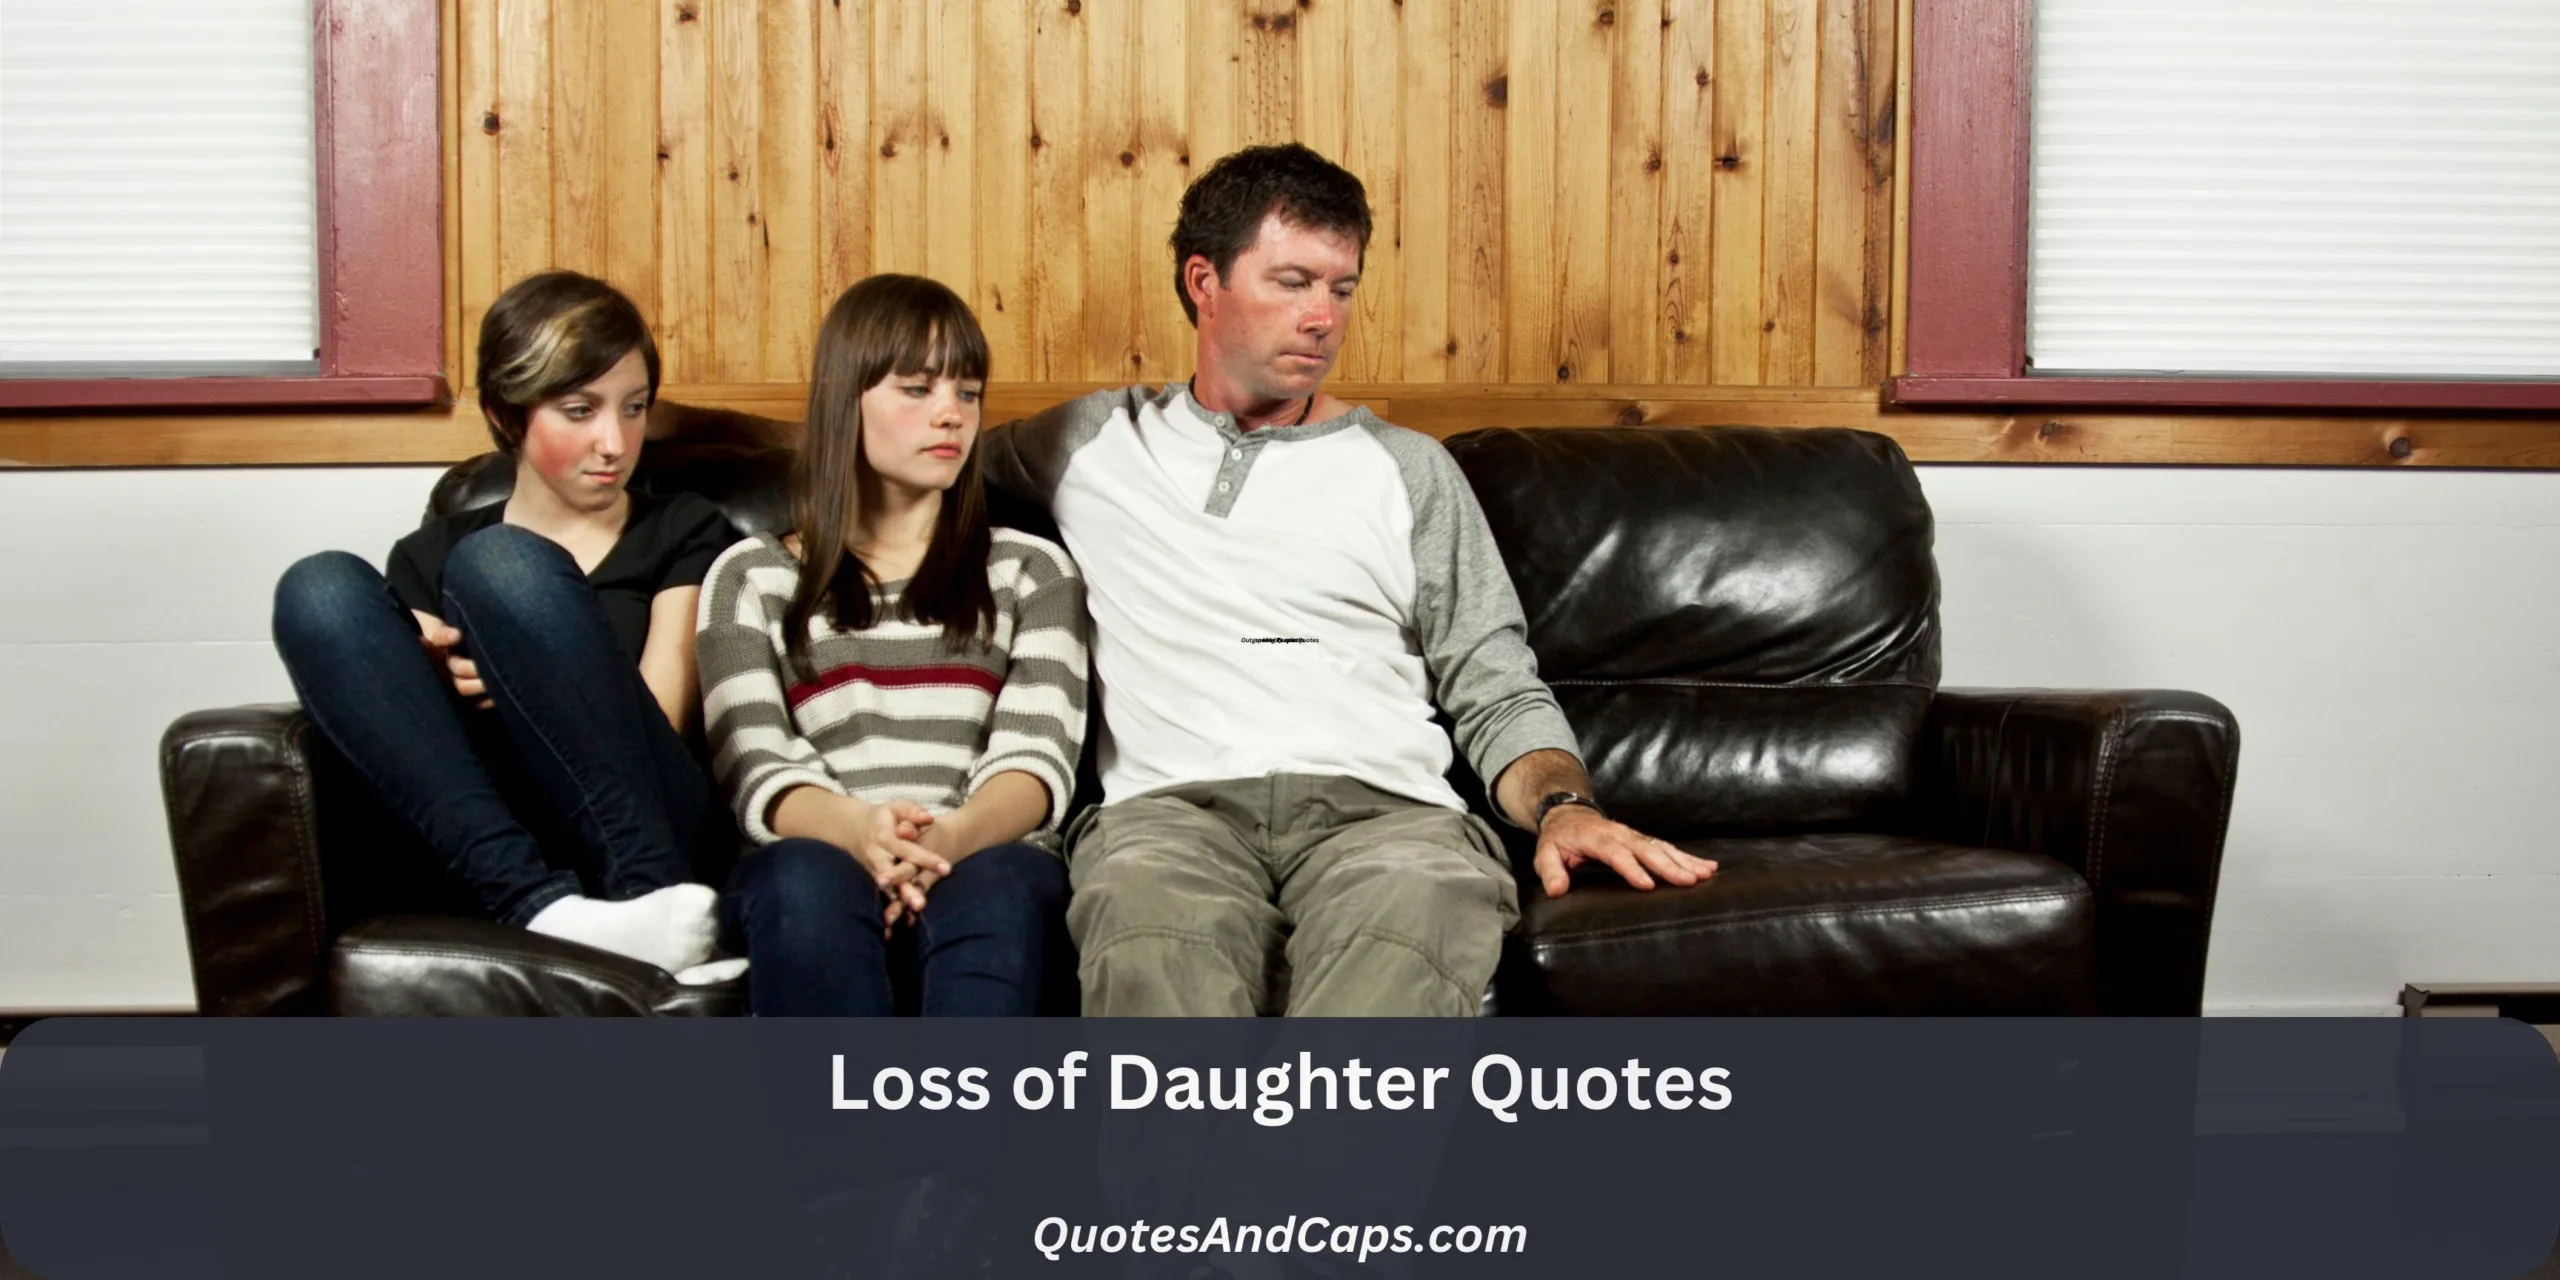 Loss of Daughter Quotes